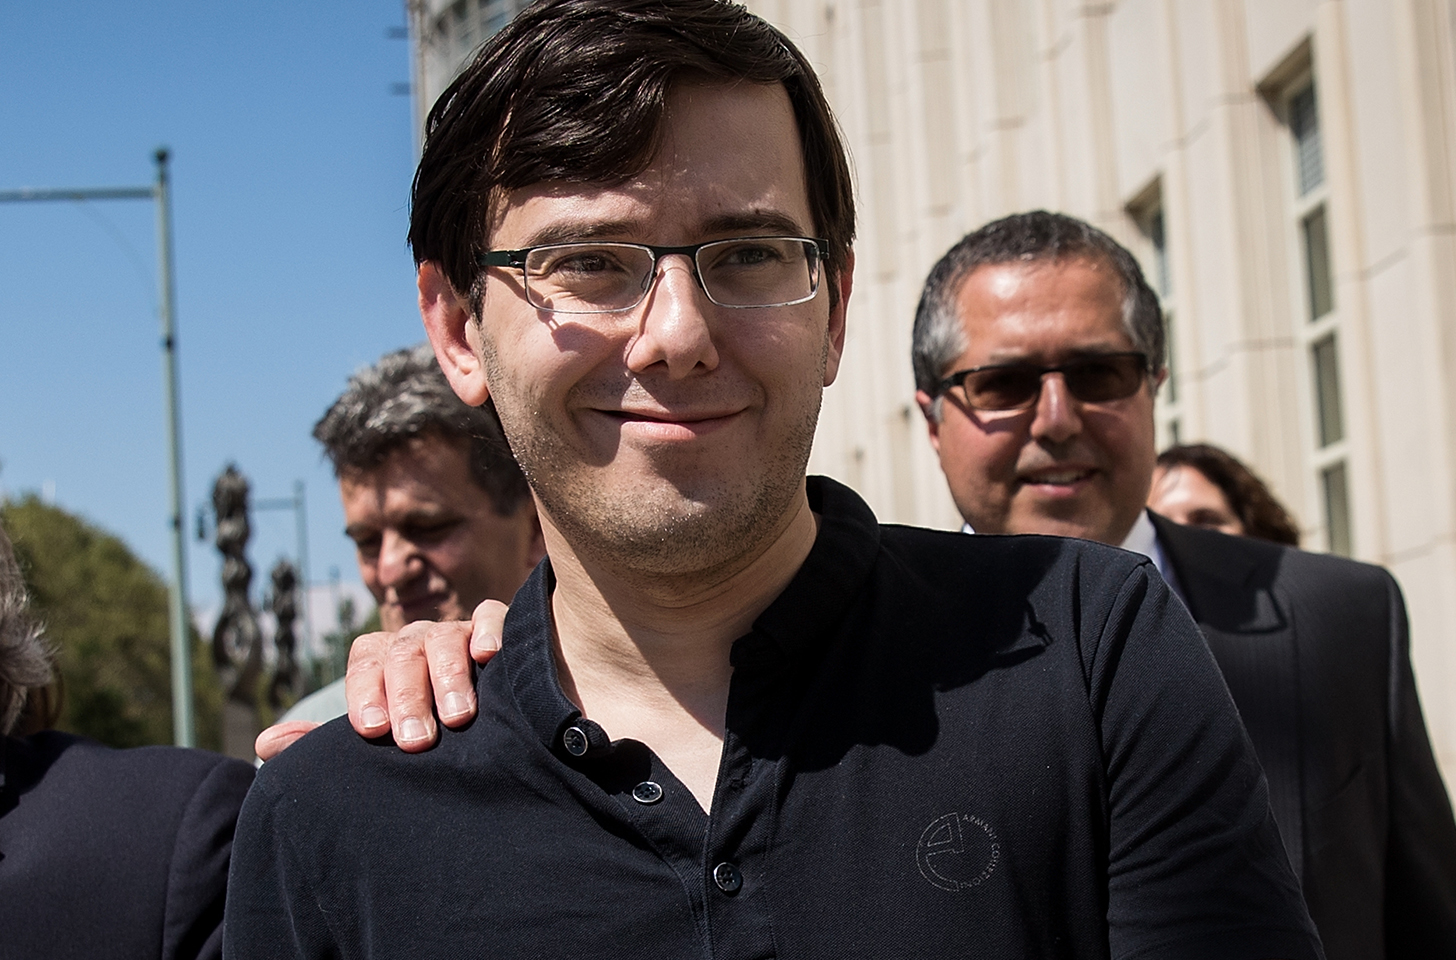 Martin Shkreli in a black polo shirt, walking out of court, smiling.